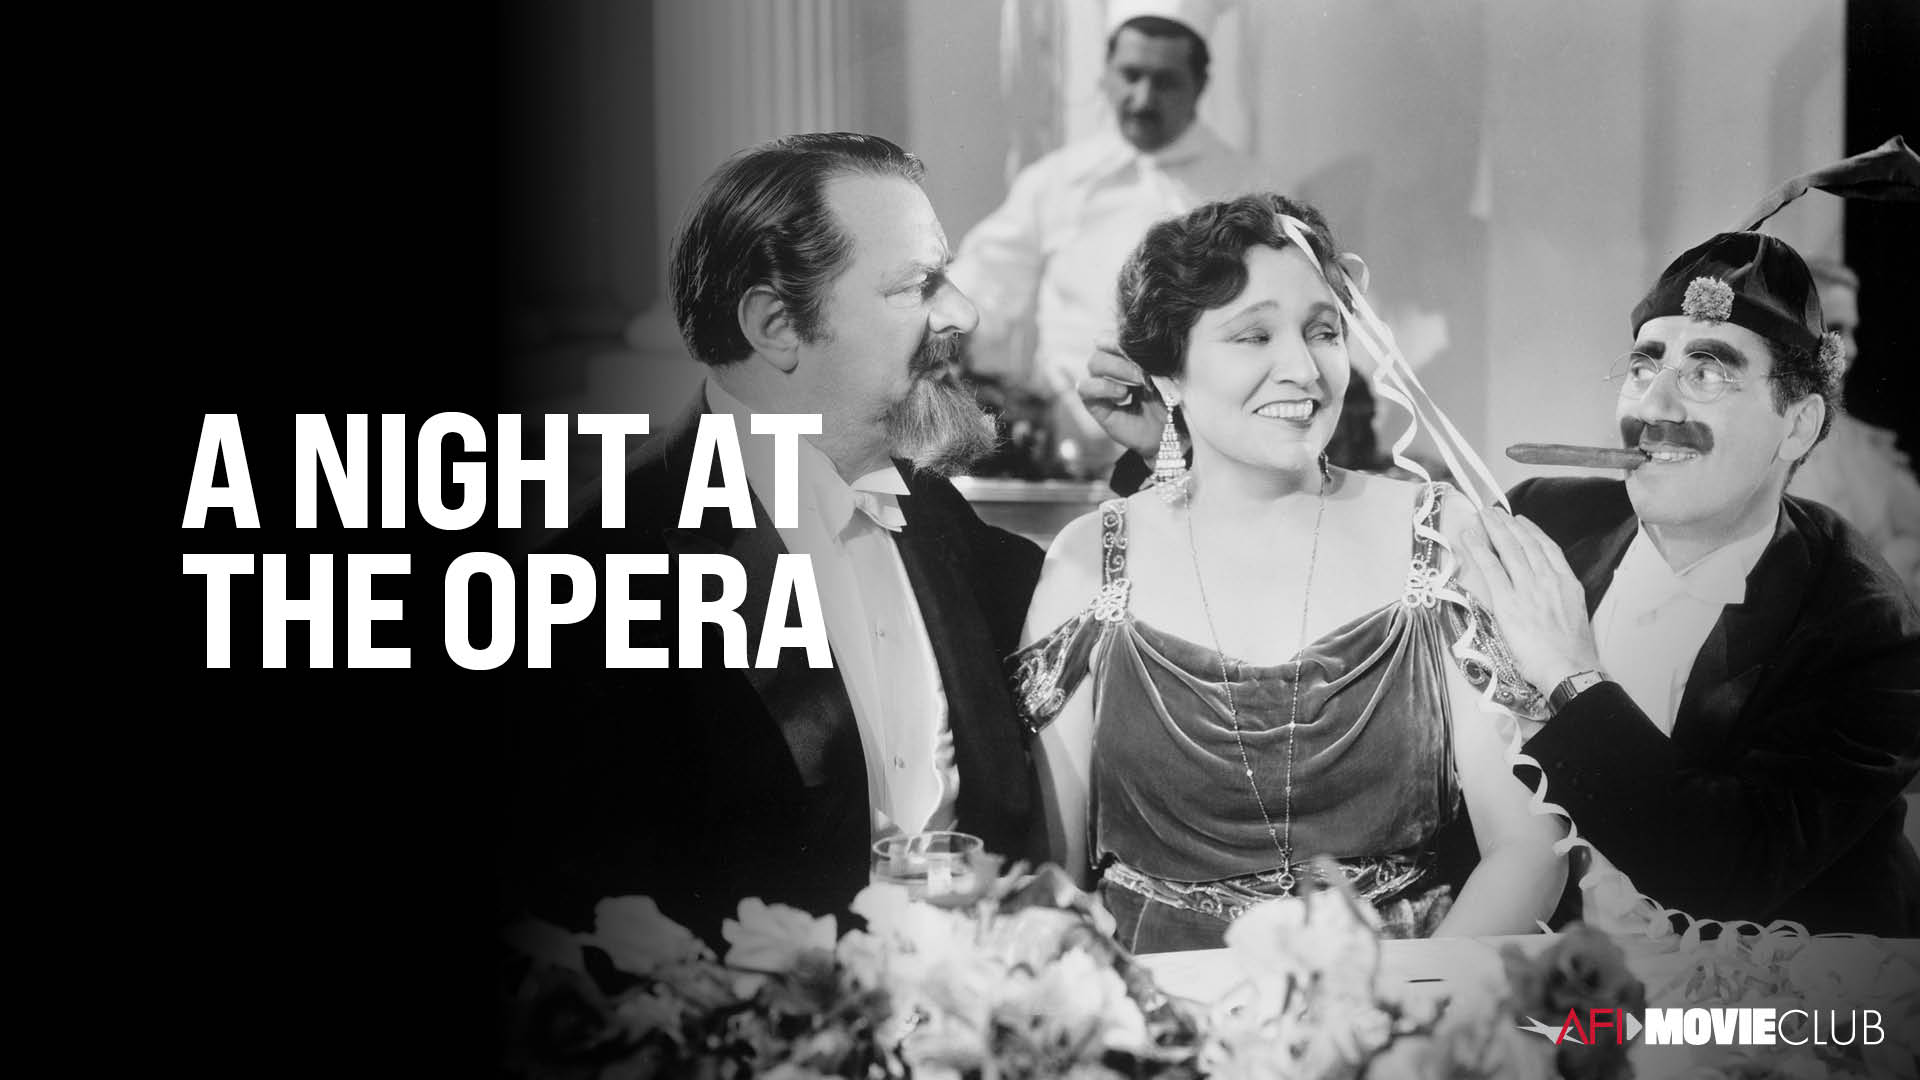 A Night At The Opera Film Still - Groucho Marx and Margaret Dumont